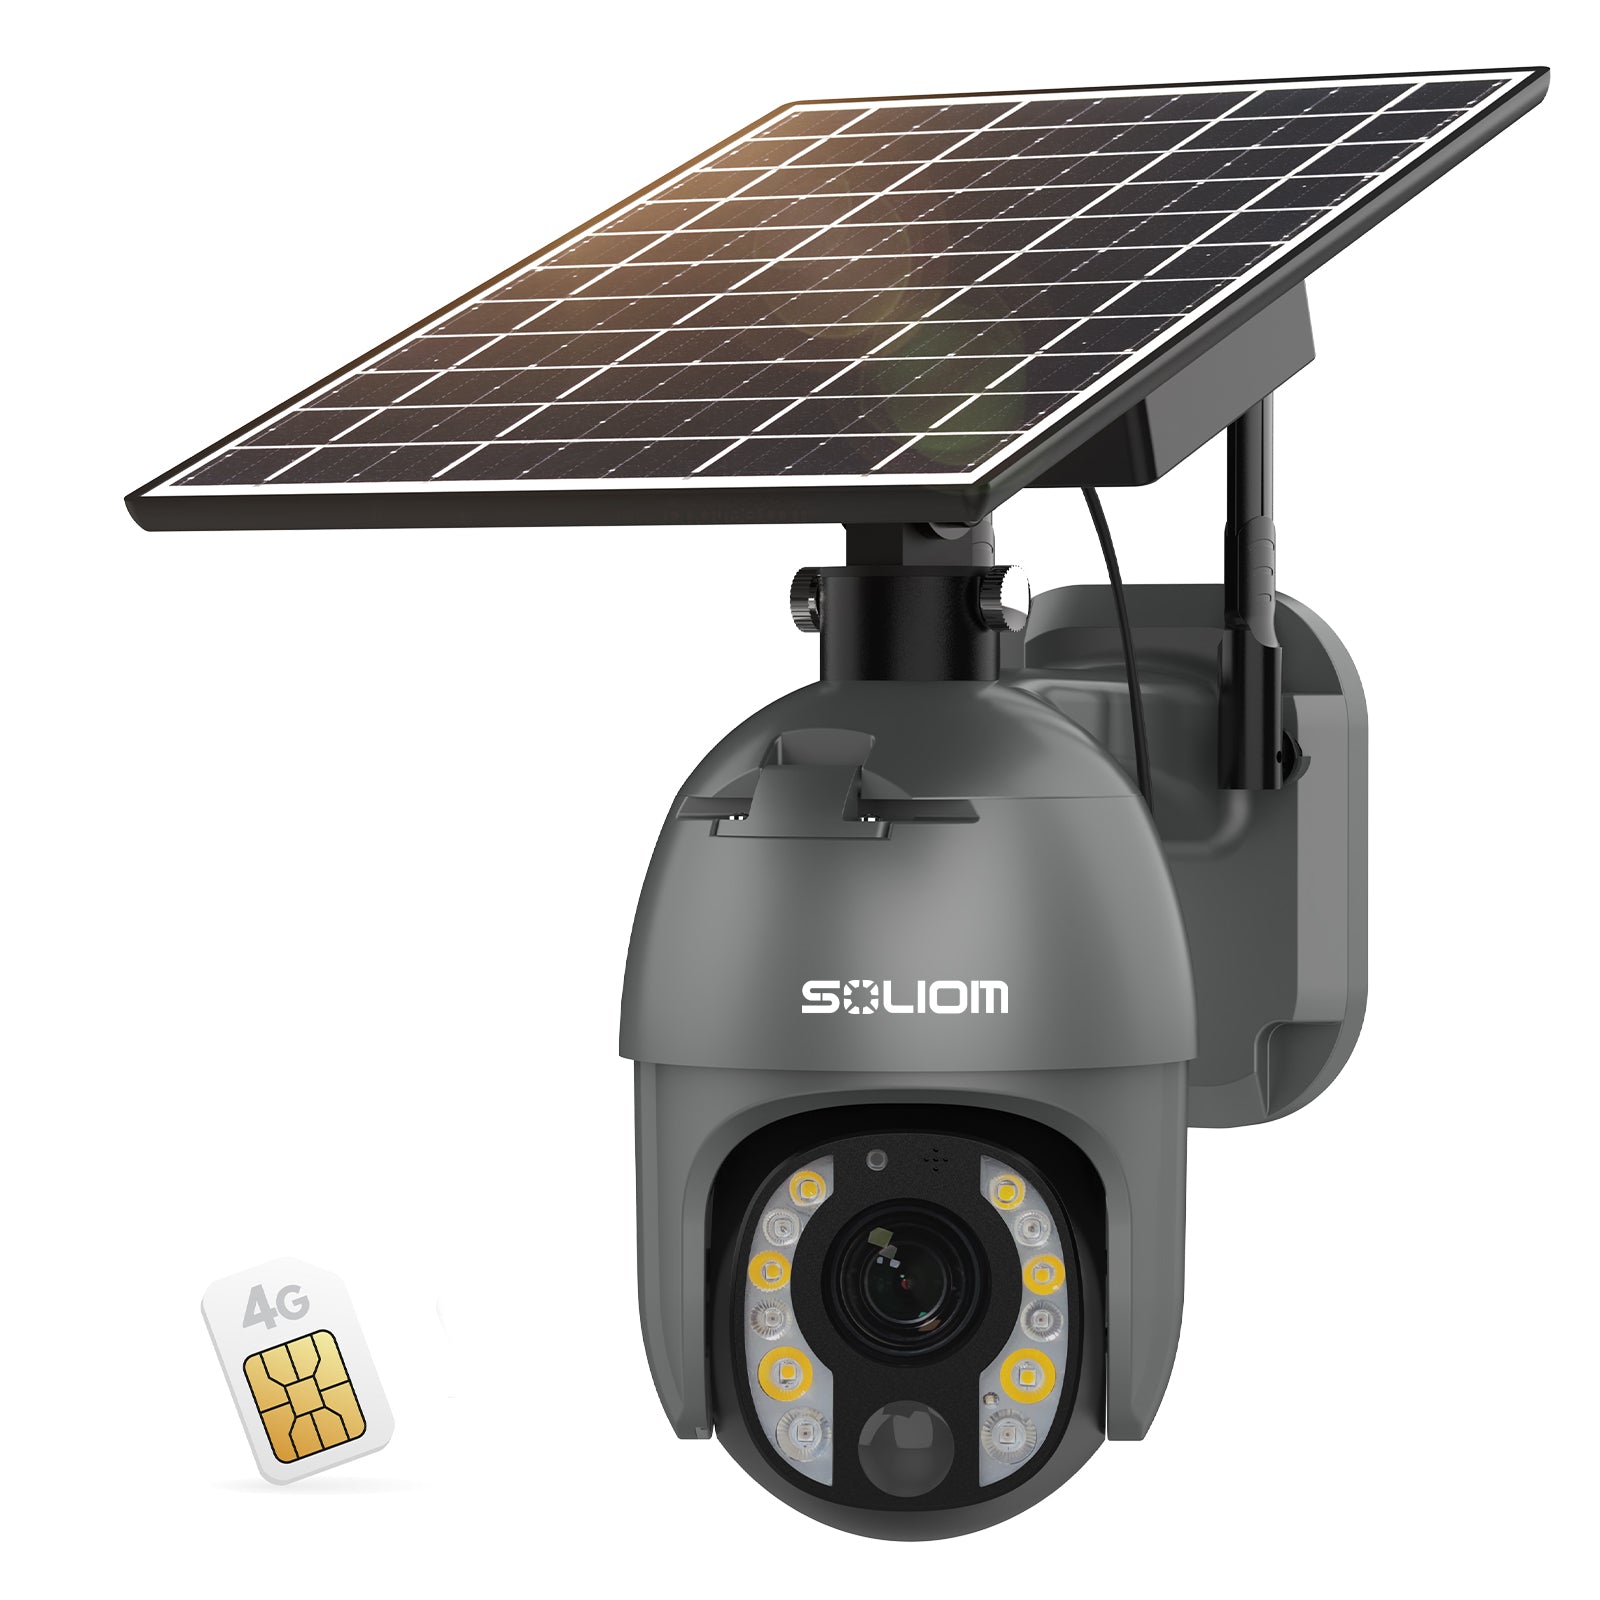 SOLIOM 5MP Security Camera Outdoor with 10X Optical Zoom, 4G LTE Cellular Security Camera with Battery & Solar Powered, Human Detection, Auto Tracking, Spotlight Color Night Vision